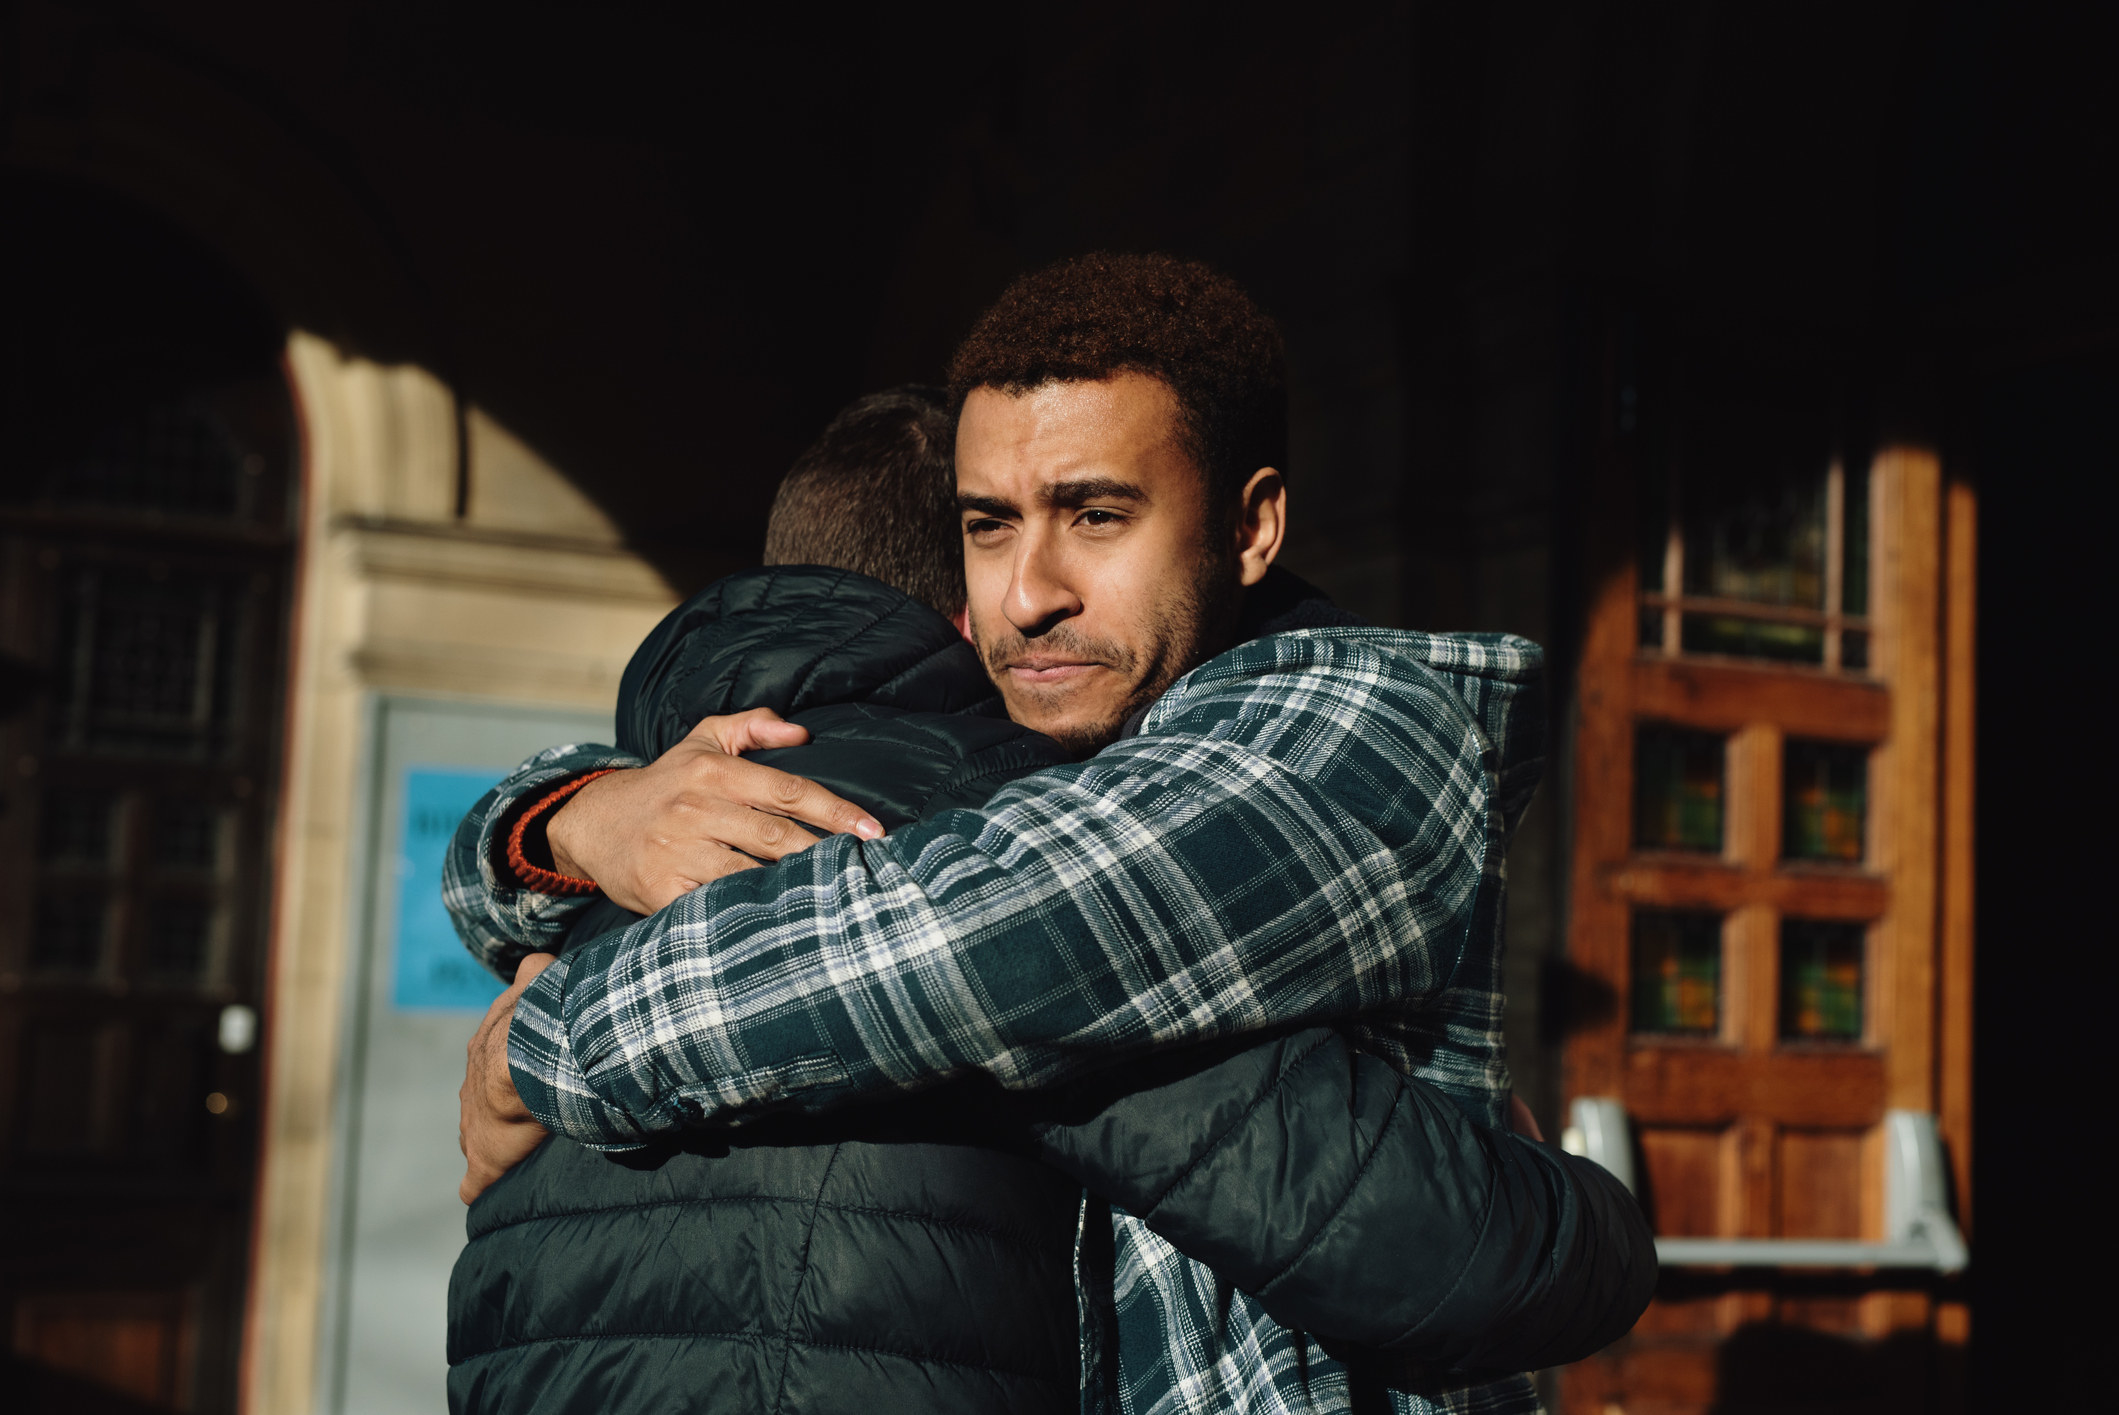 Man hugs someone while looking serious